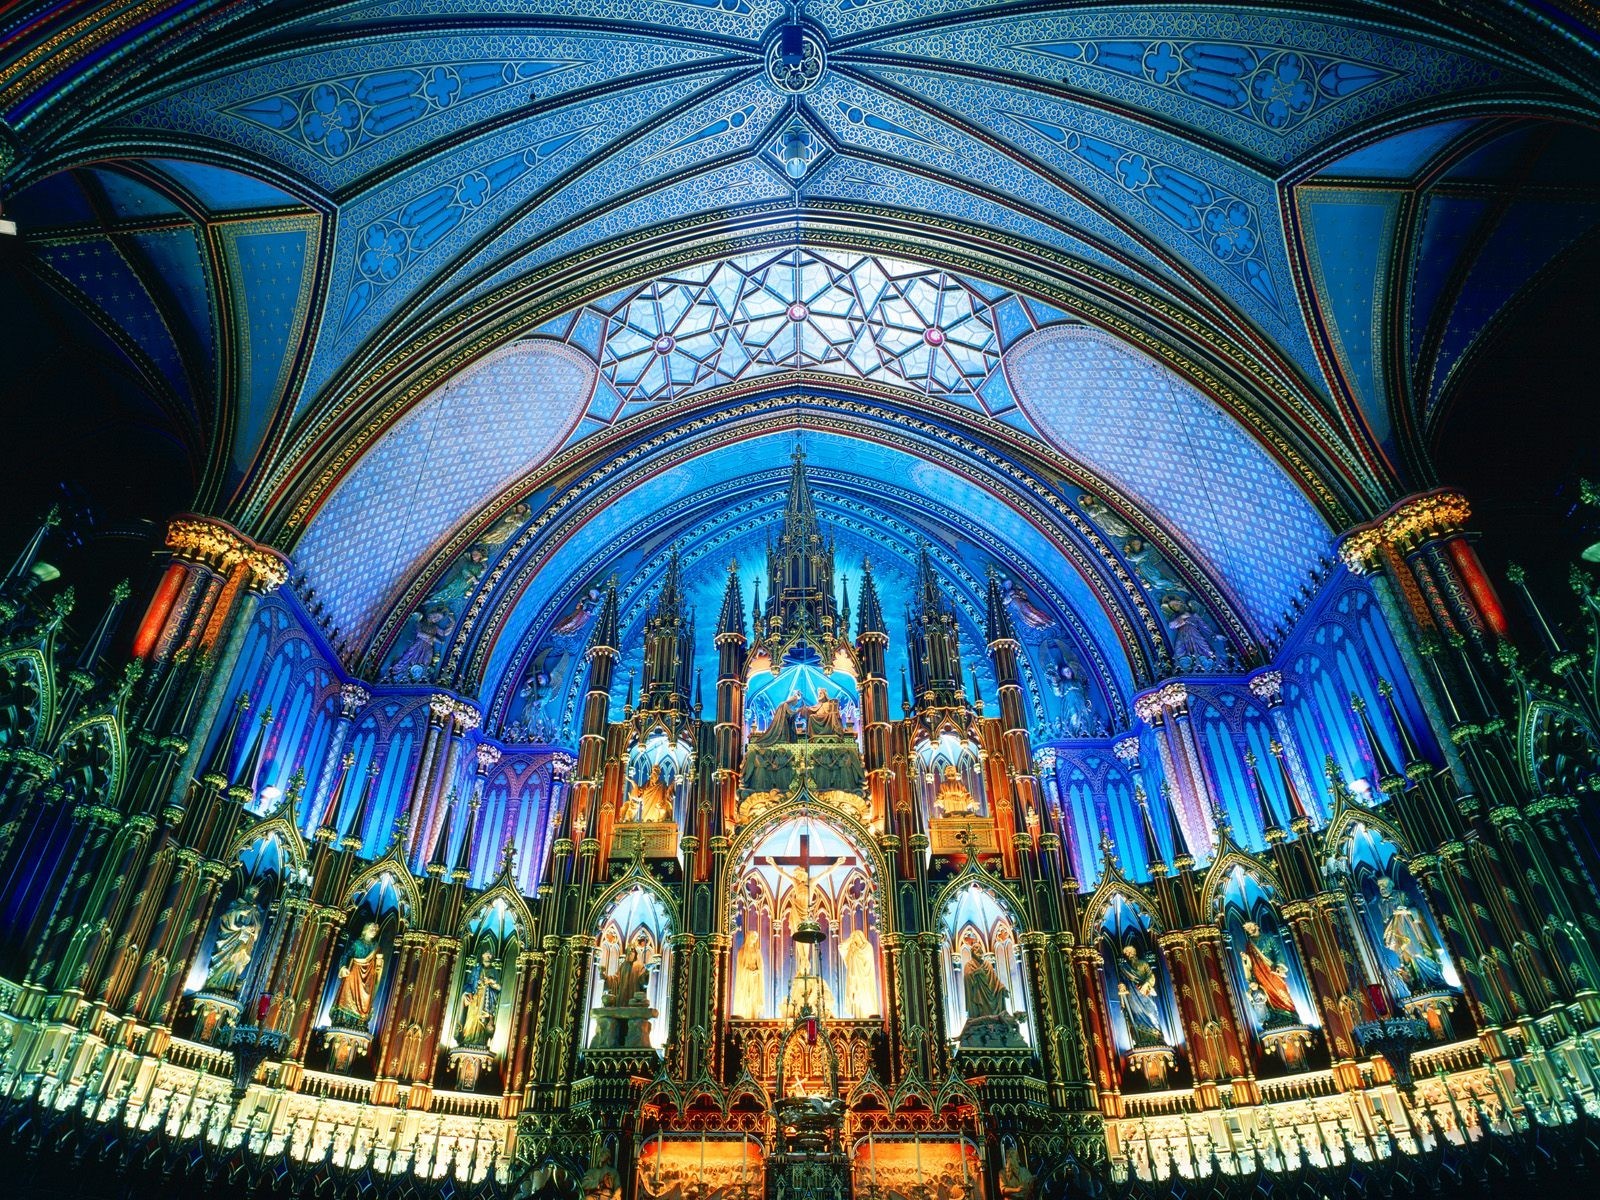 Notre-Dame Basilica of Montreal, a stunning religious landmark